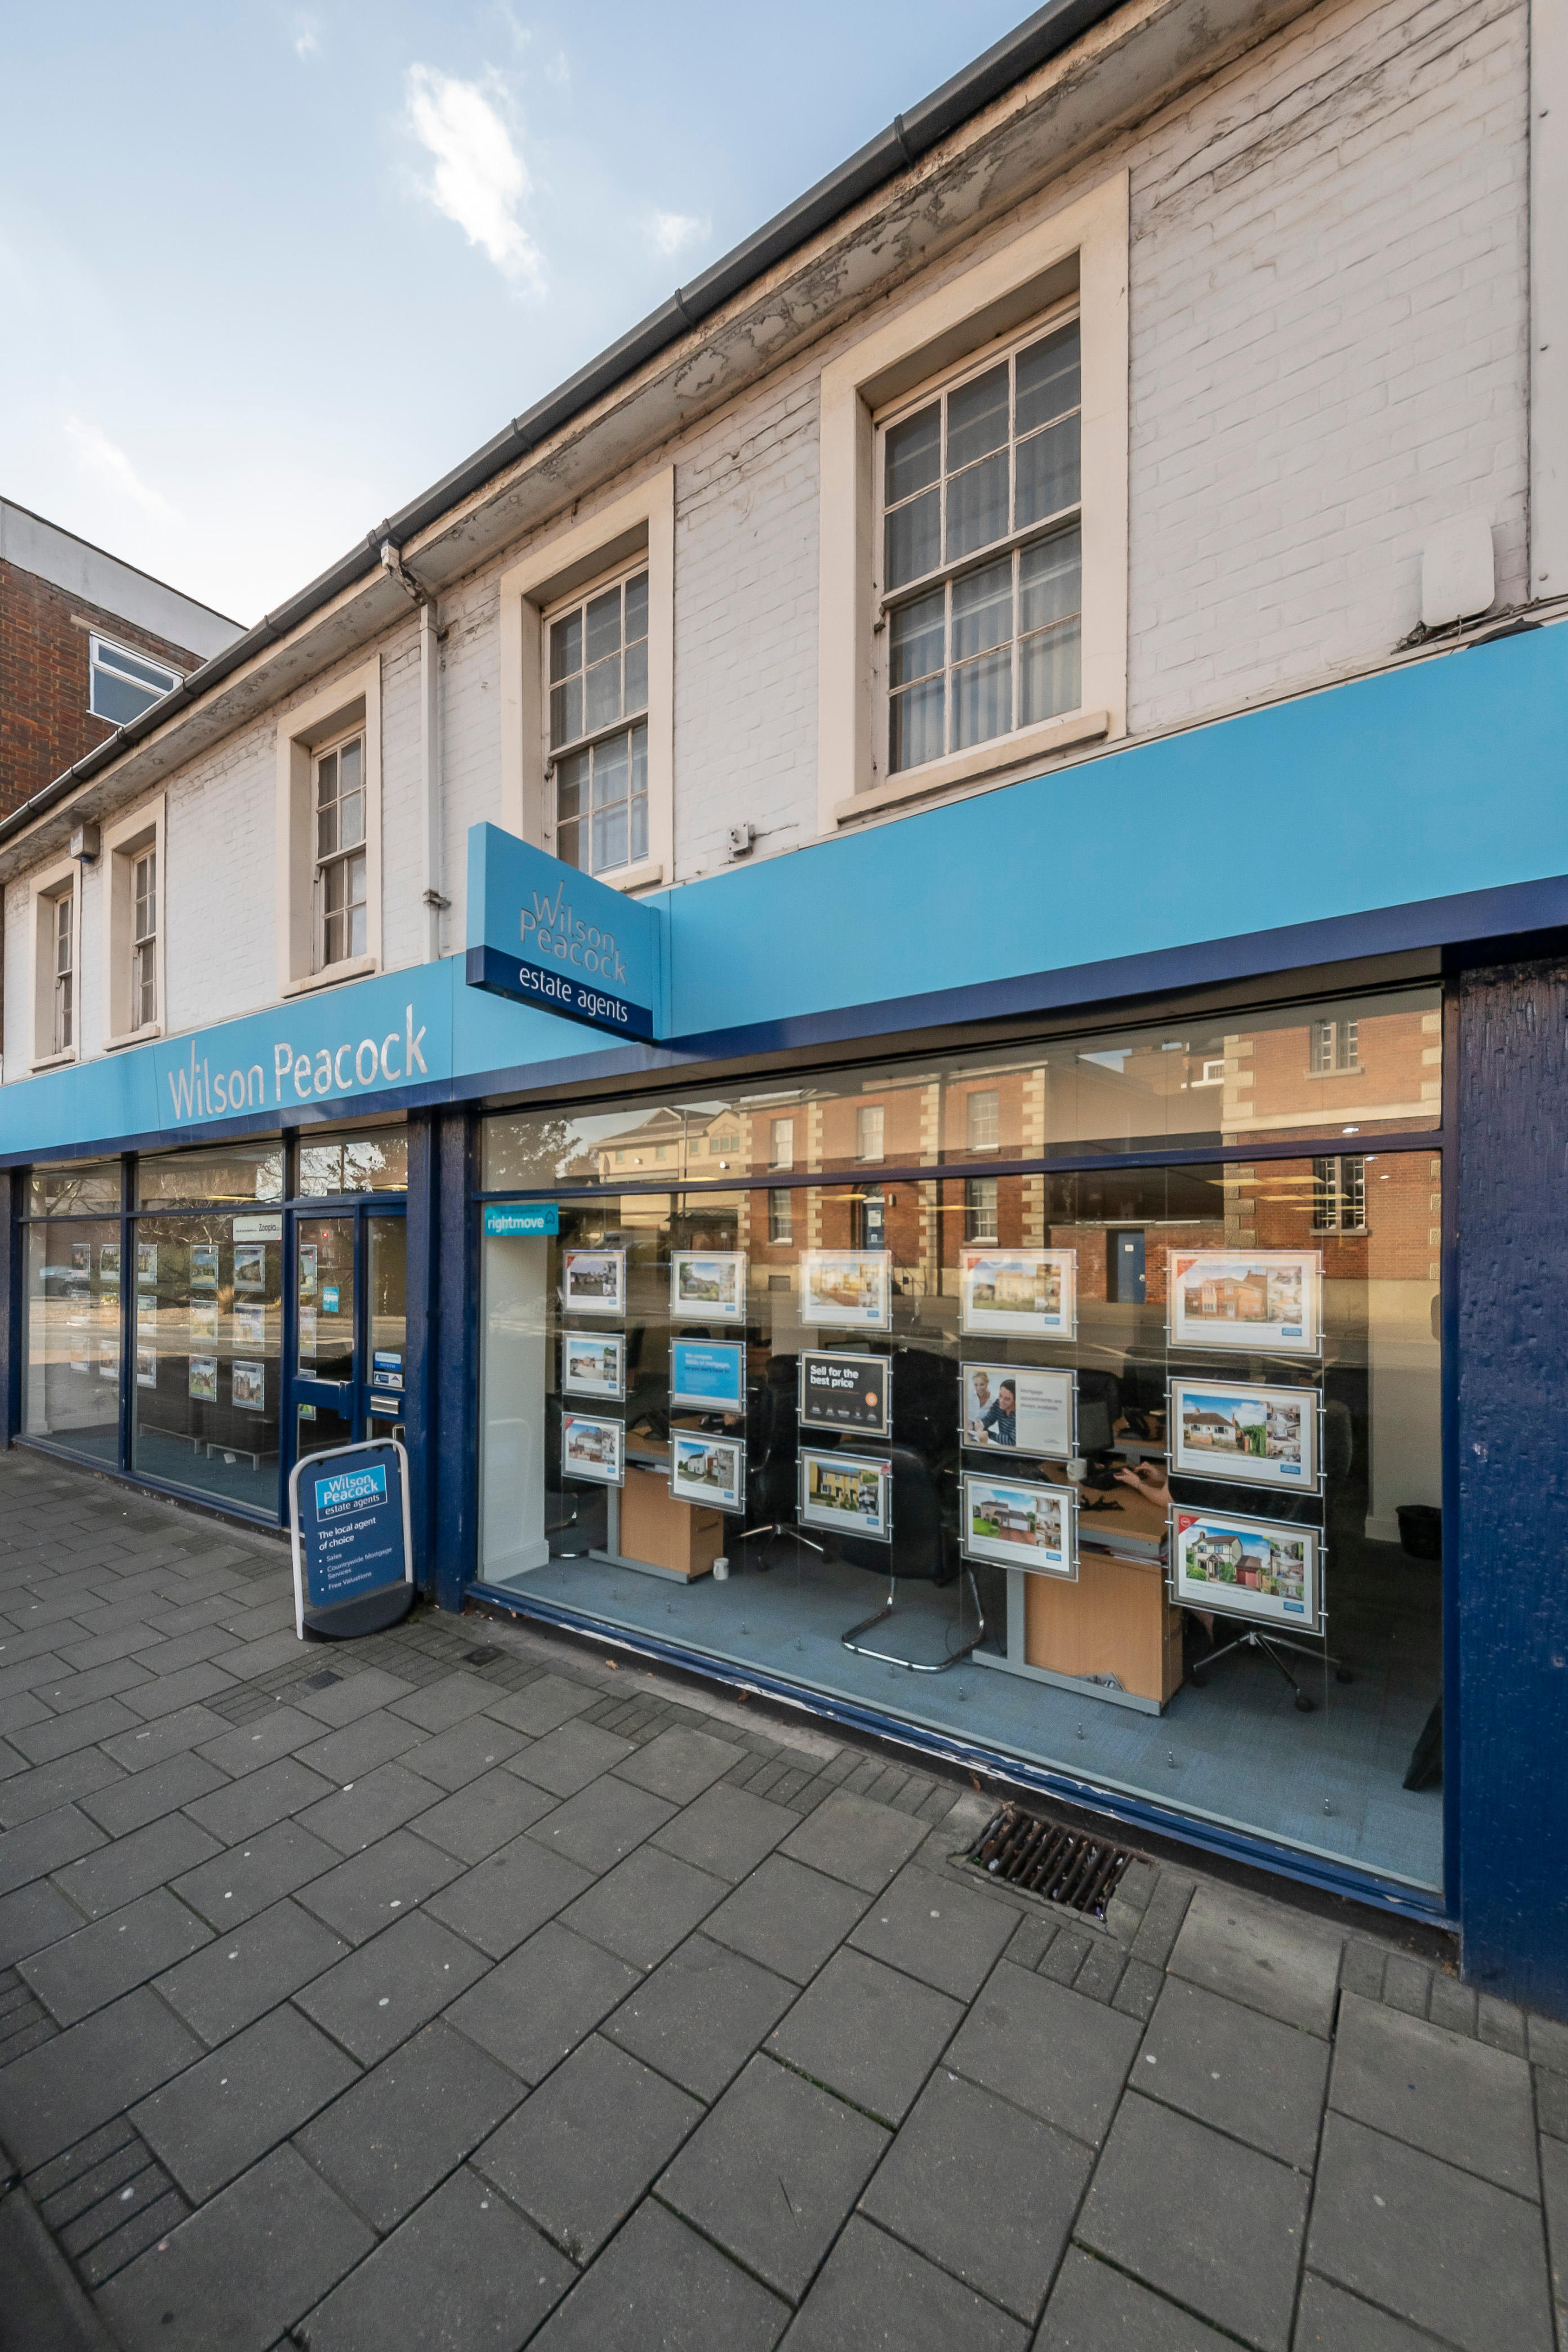 Wilson Peacock Sales and Letting Agents Bedford Bedford 01234 510144